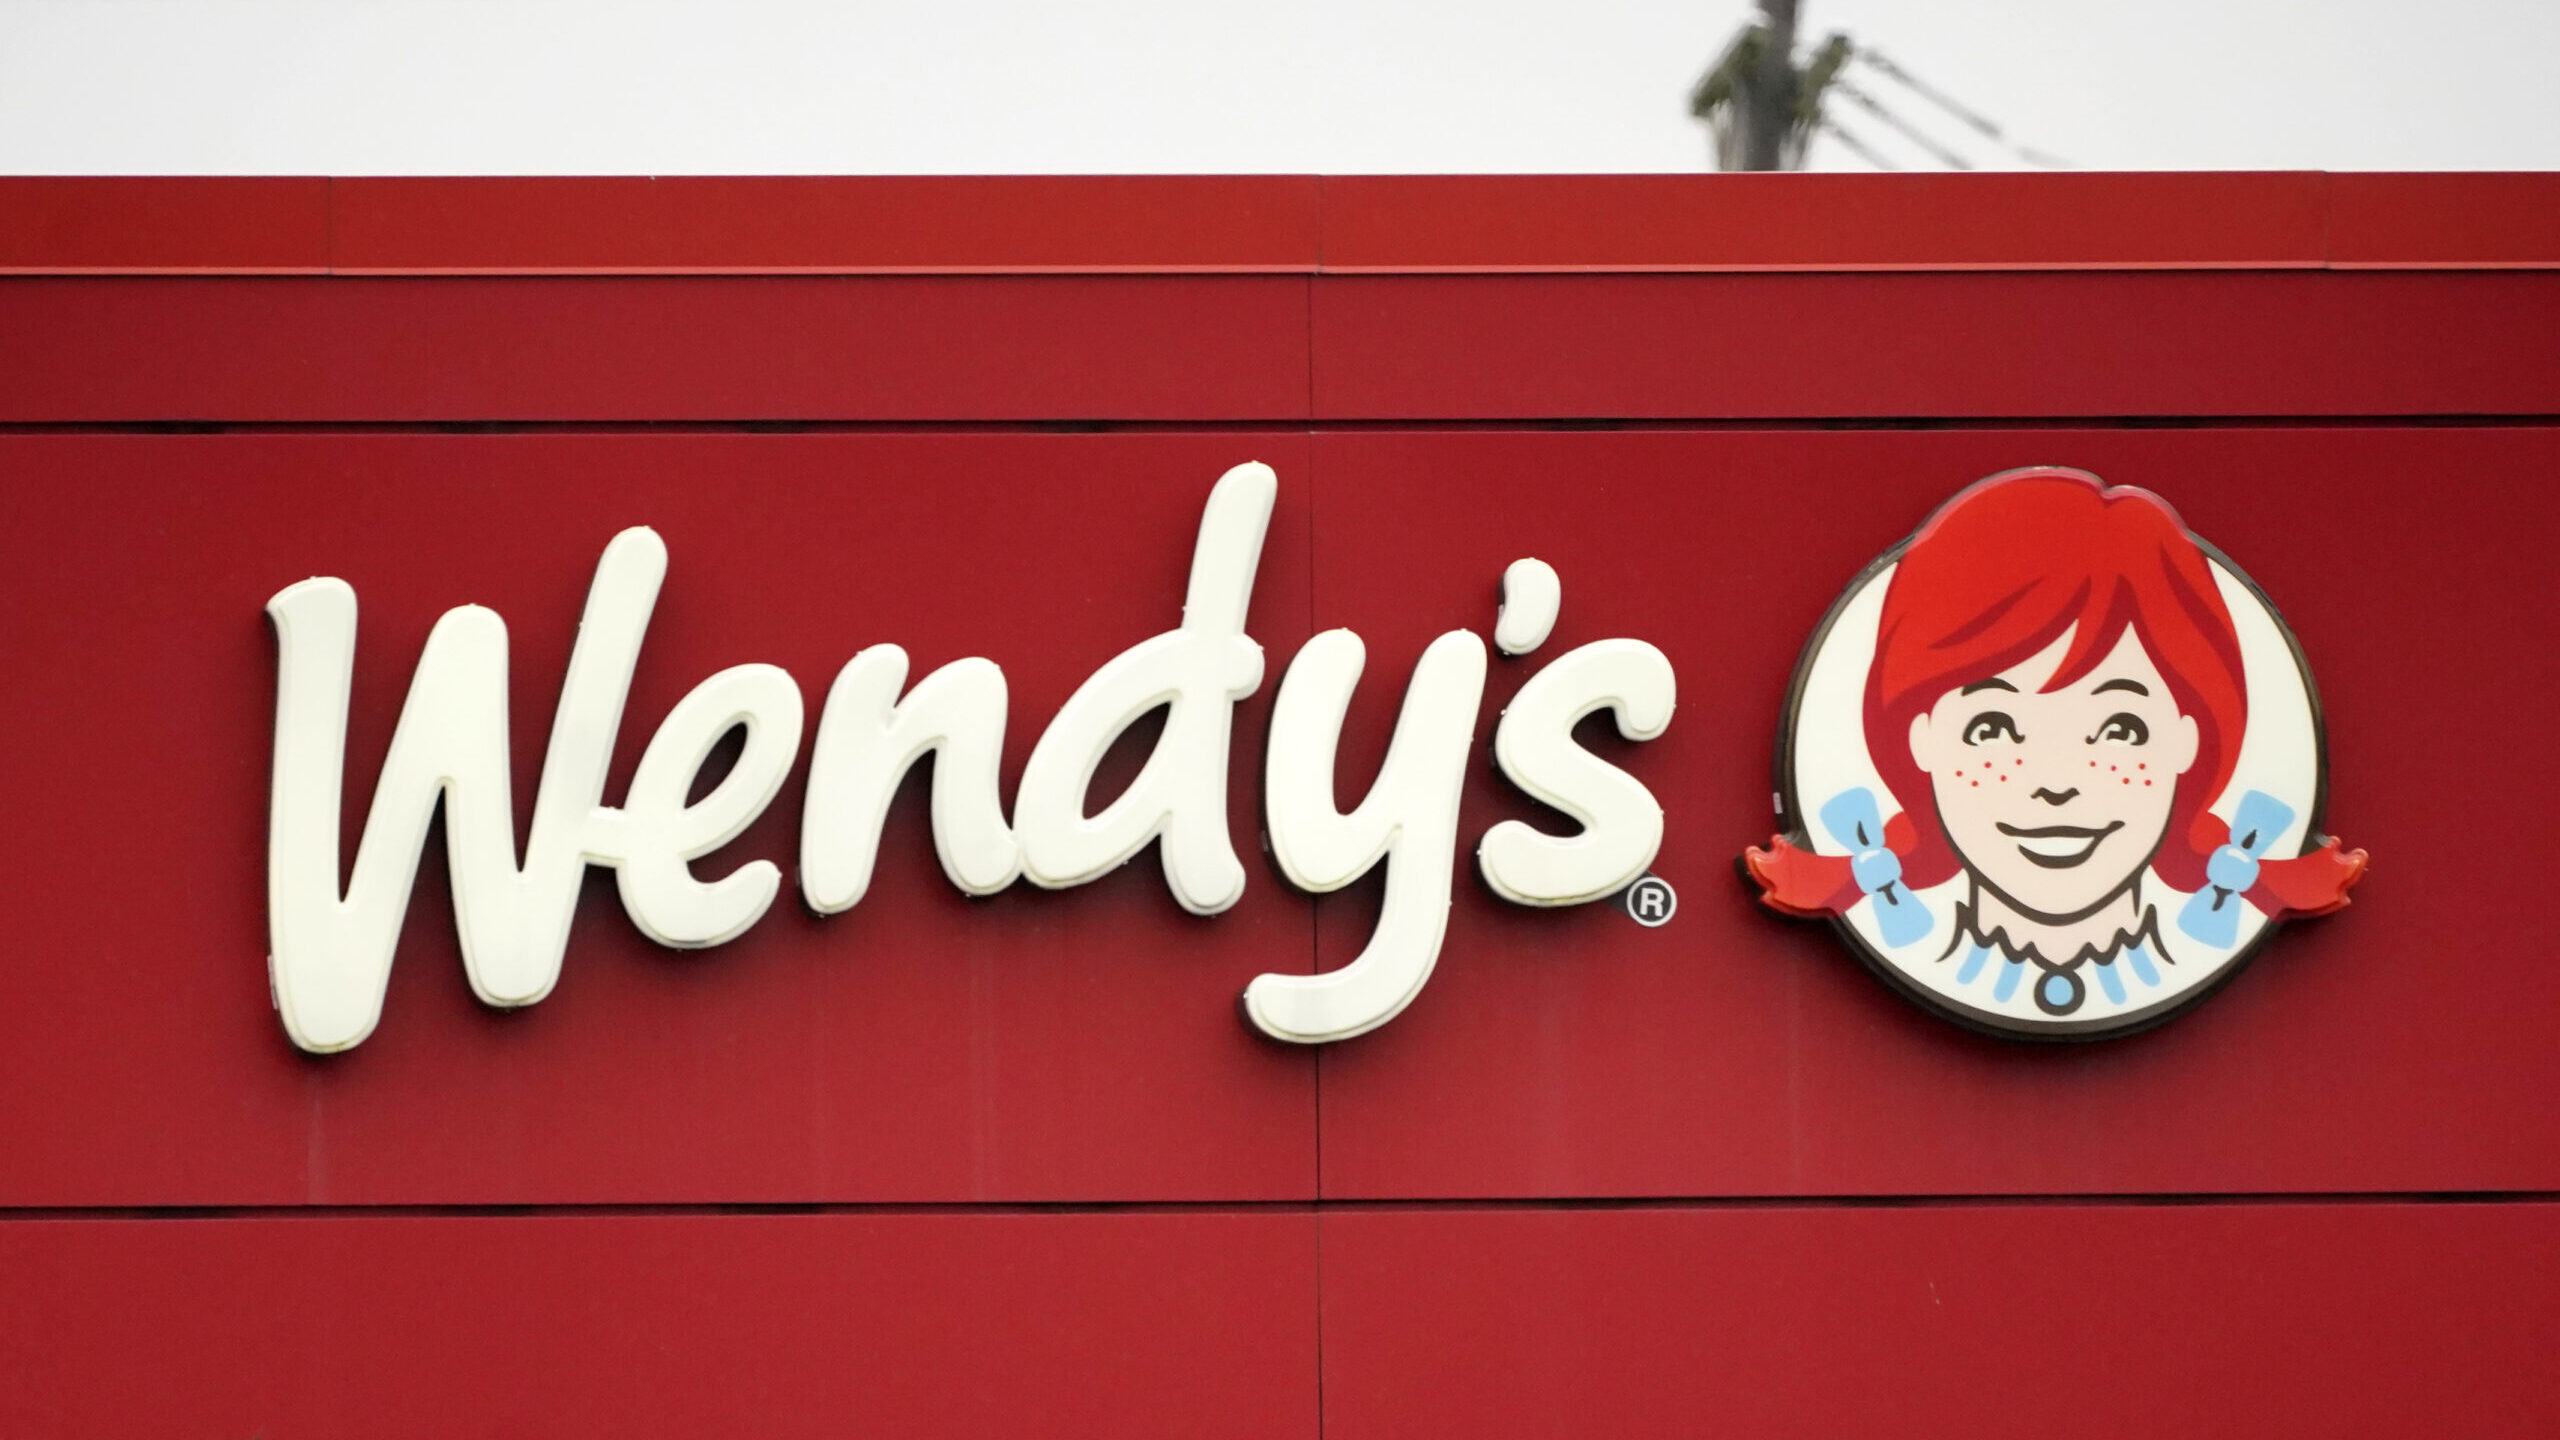 The Wendy's logo appears over a red background...